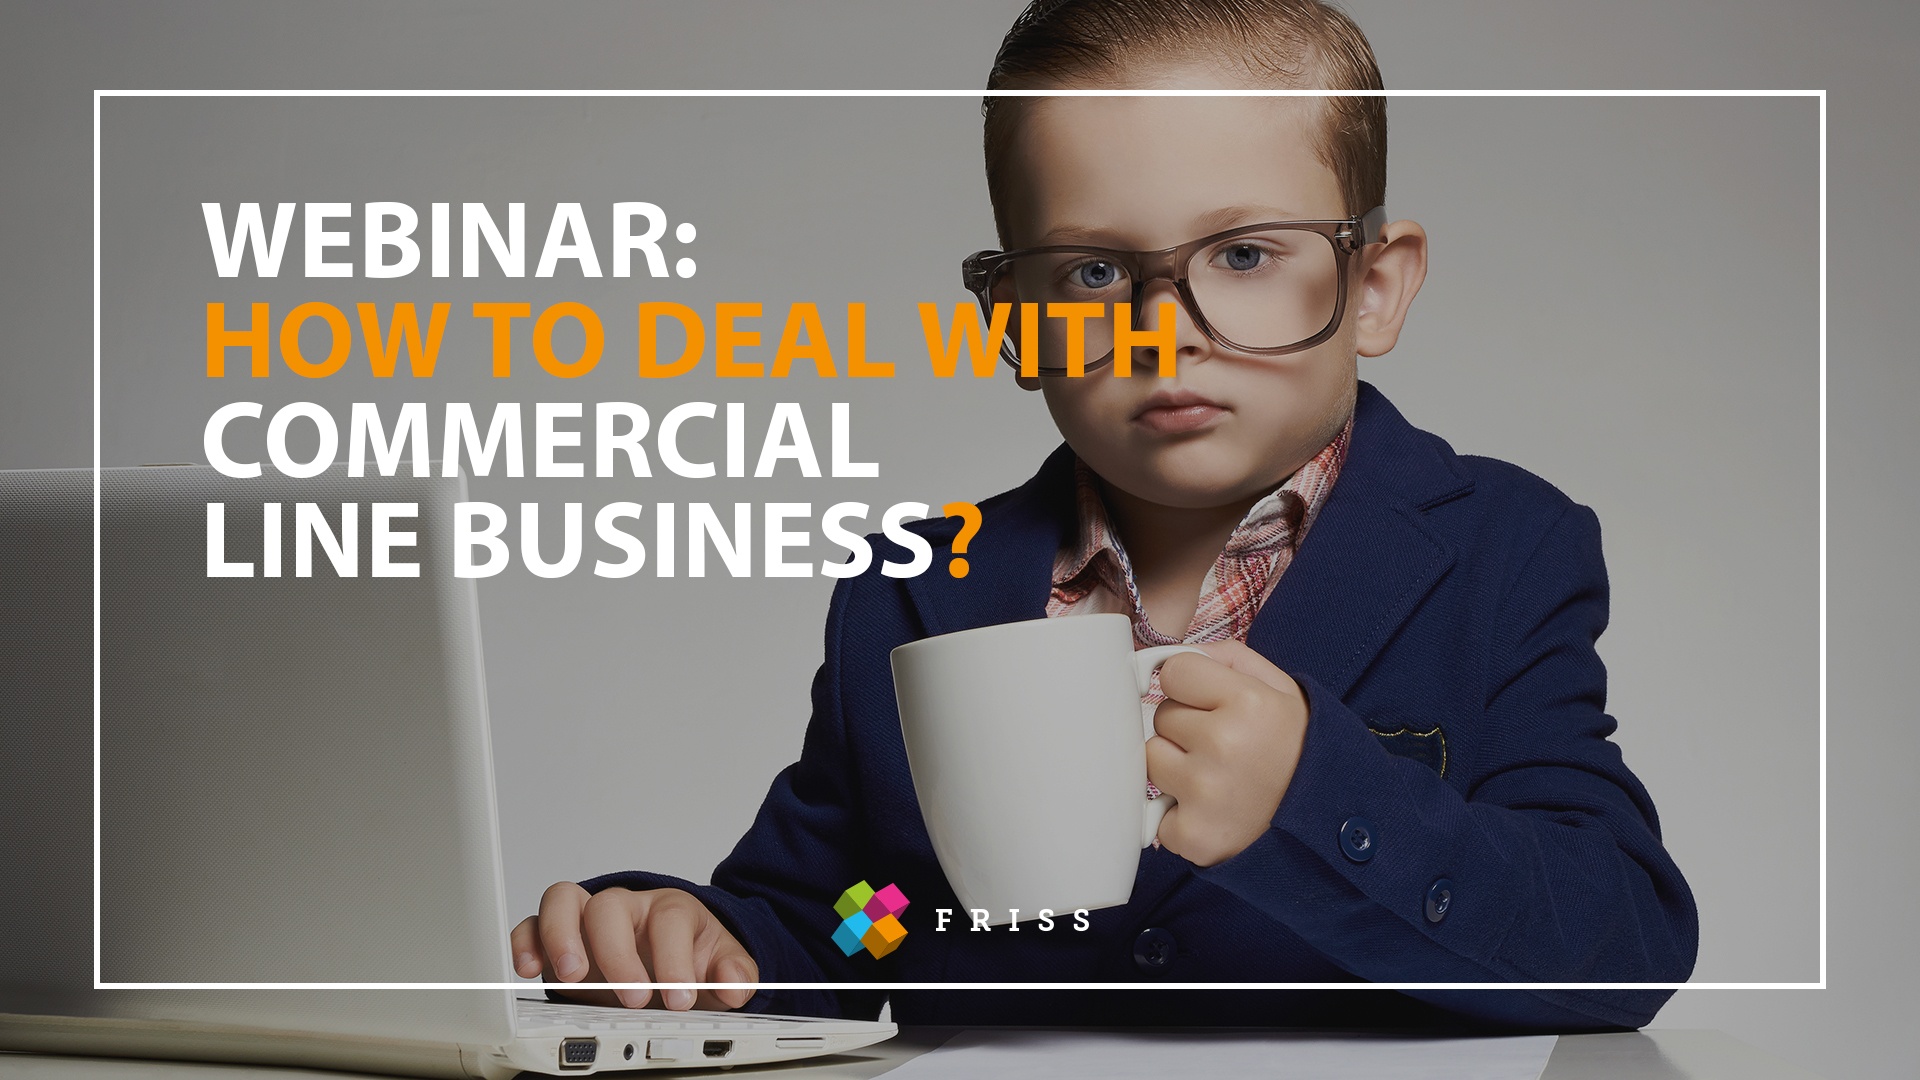 Webinar - How to deal with Commerical Line Business?